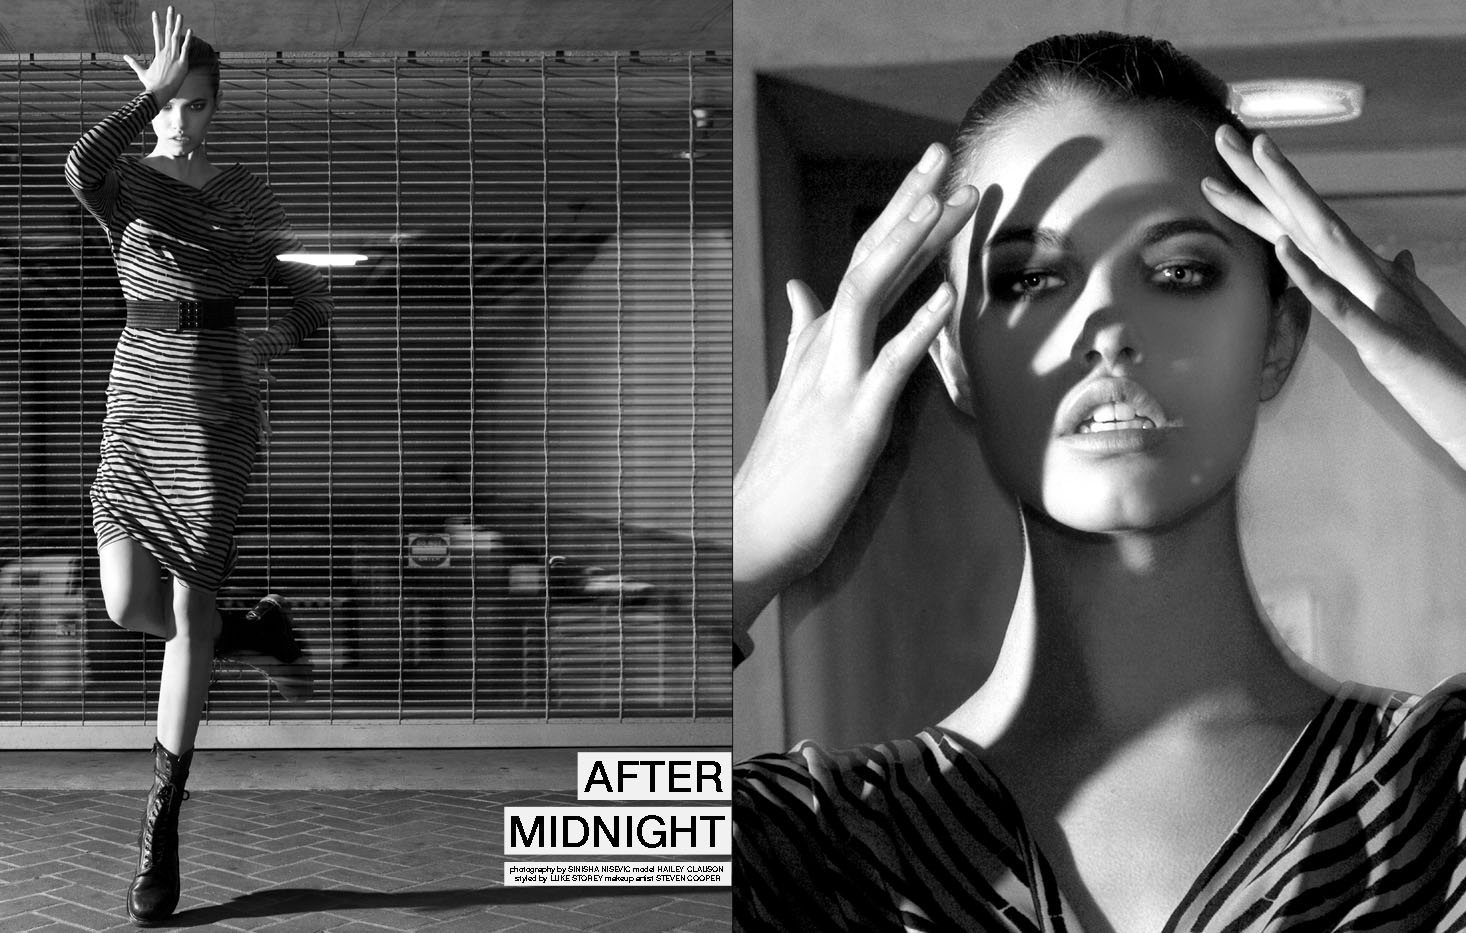 “After Midnight” featuring Hailey Clauson